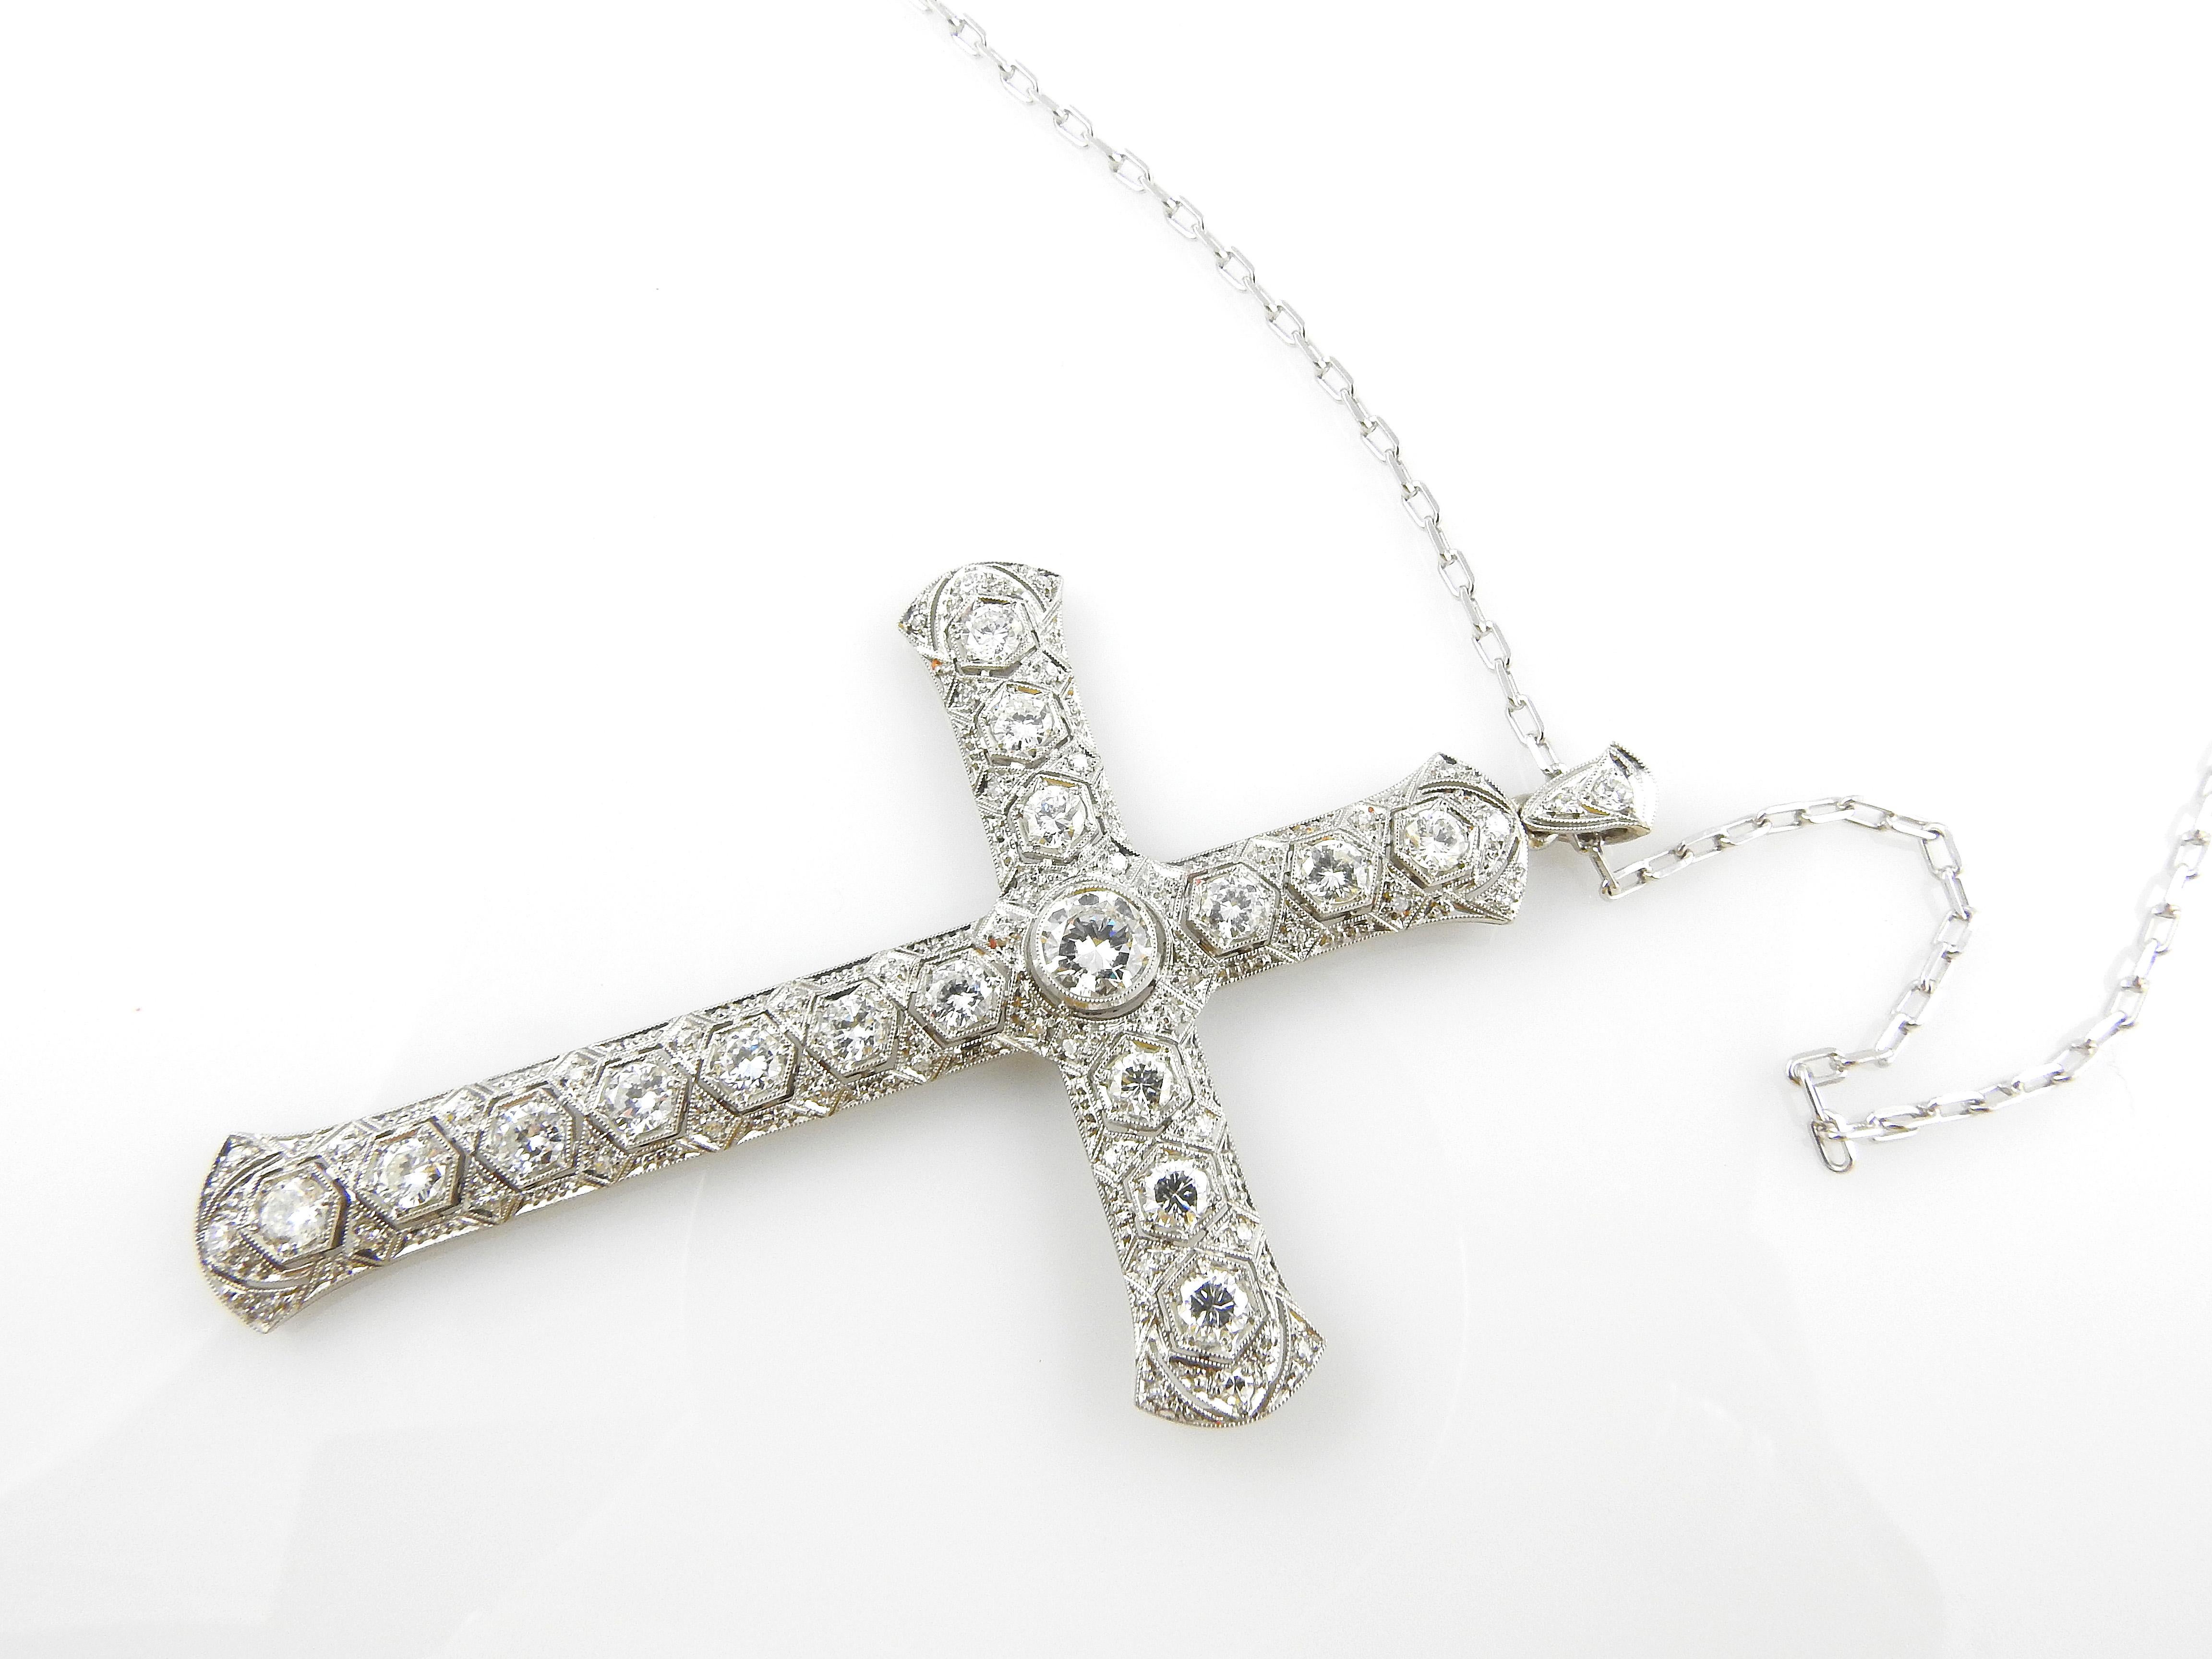 14K White Gold Large Diamond Cross Pendant Necklace 3.51cts #14328 For Sale 2